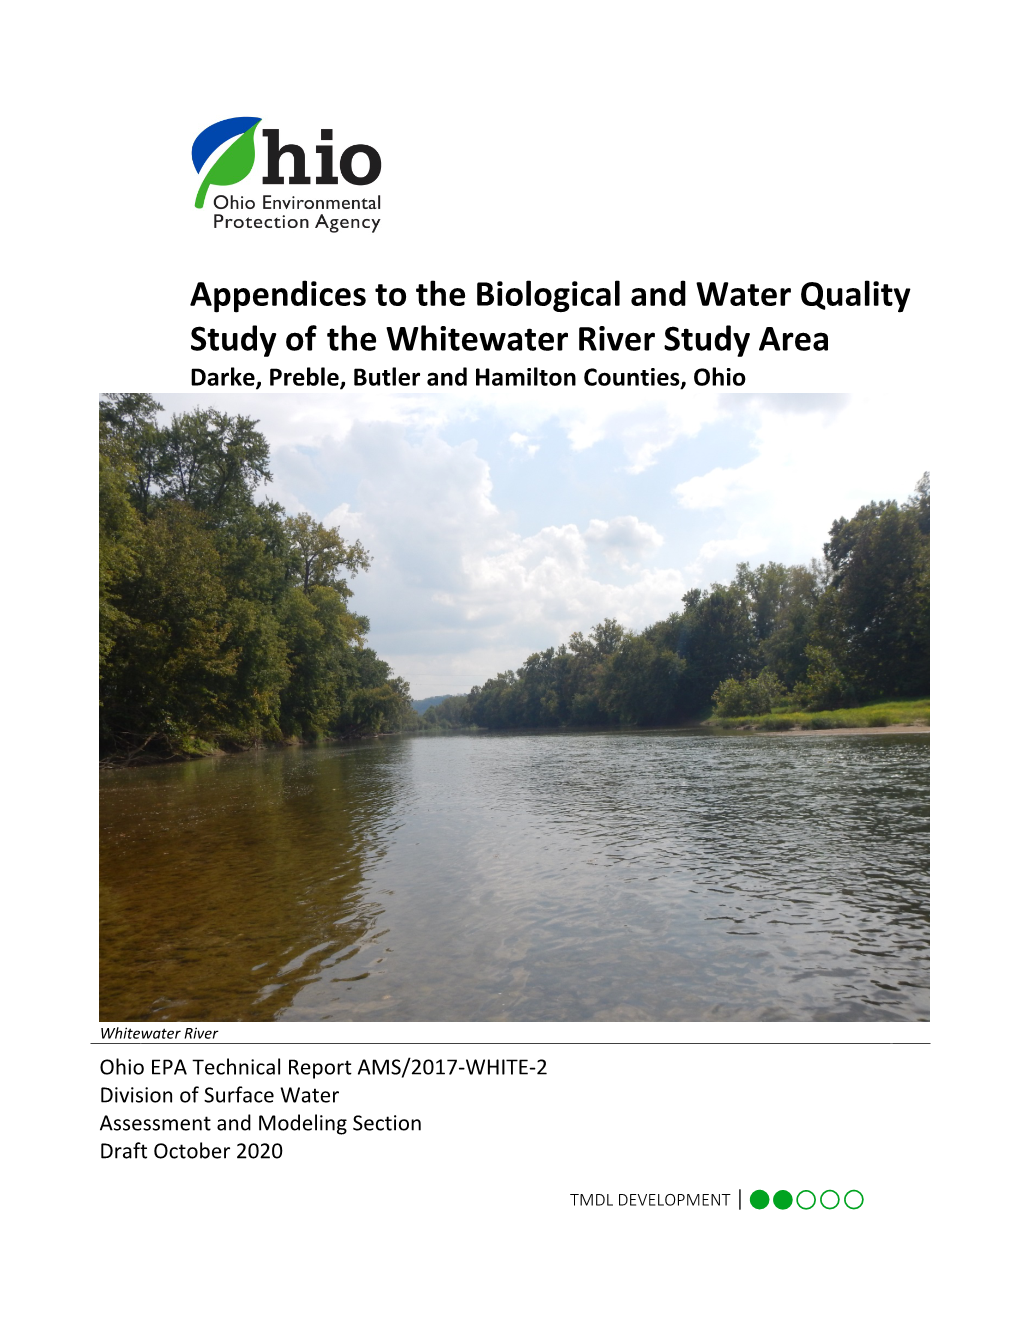 Appendices to the Biological and Water Quality Study of the Whitewater River Study Area Darke, Preble, Butler and Hamilton Counties, Ohio